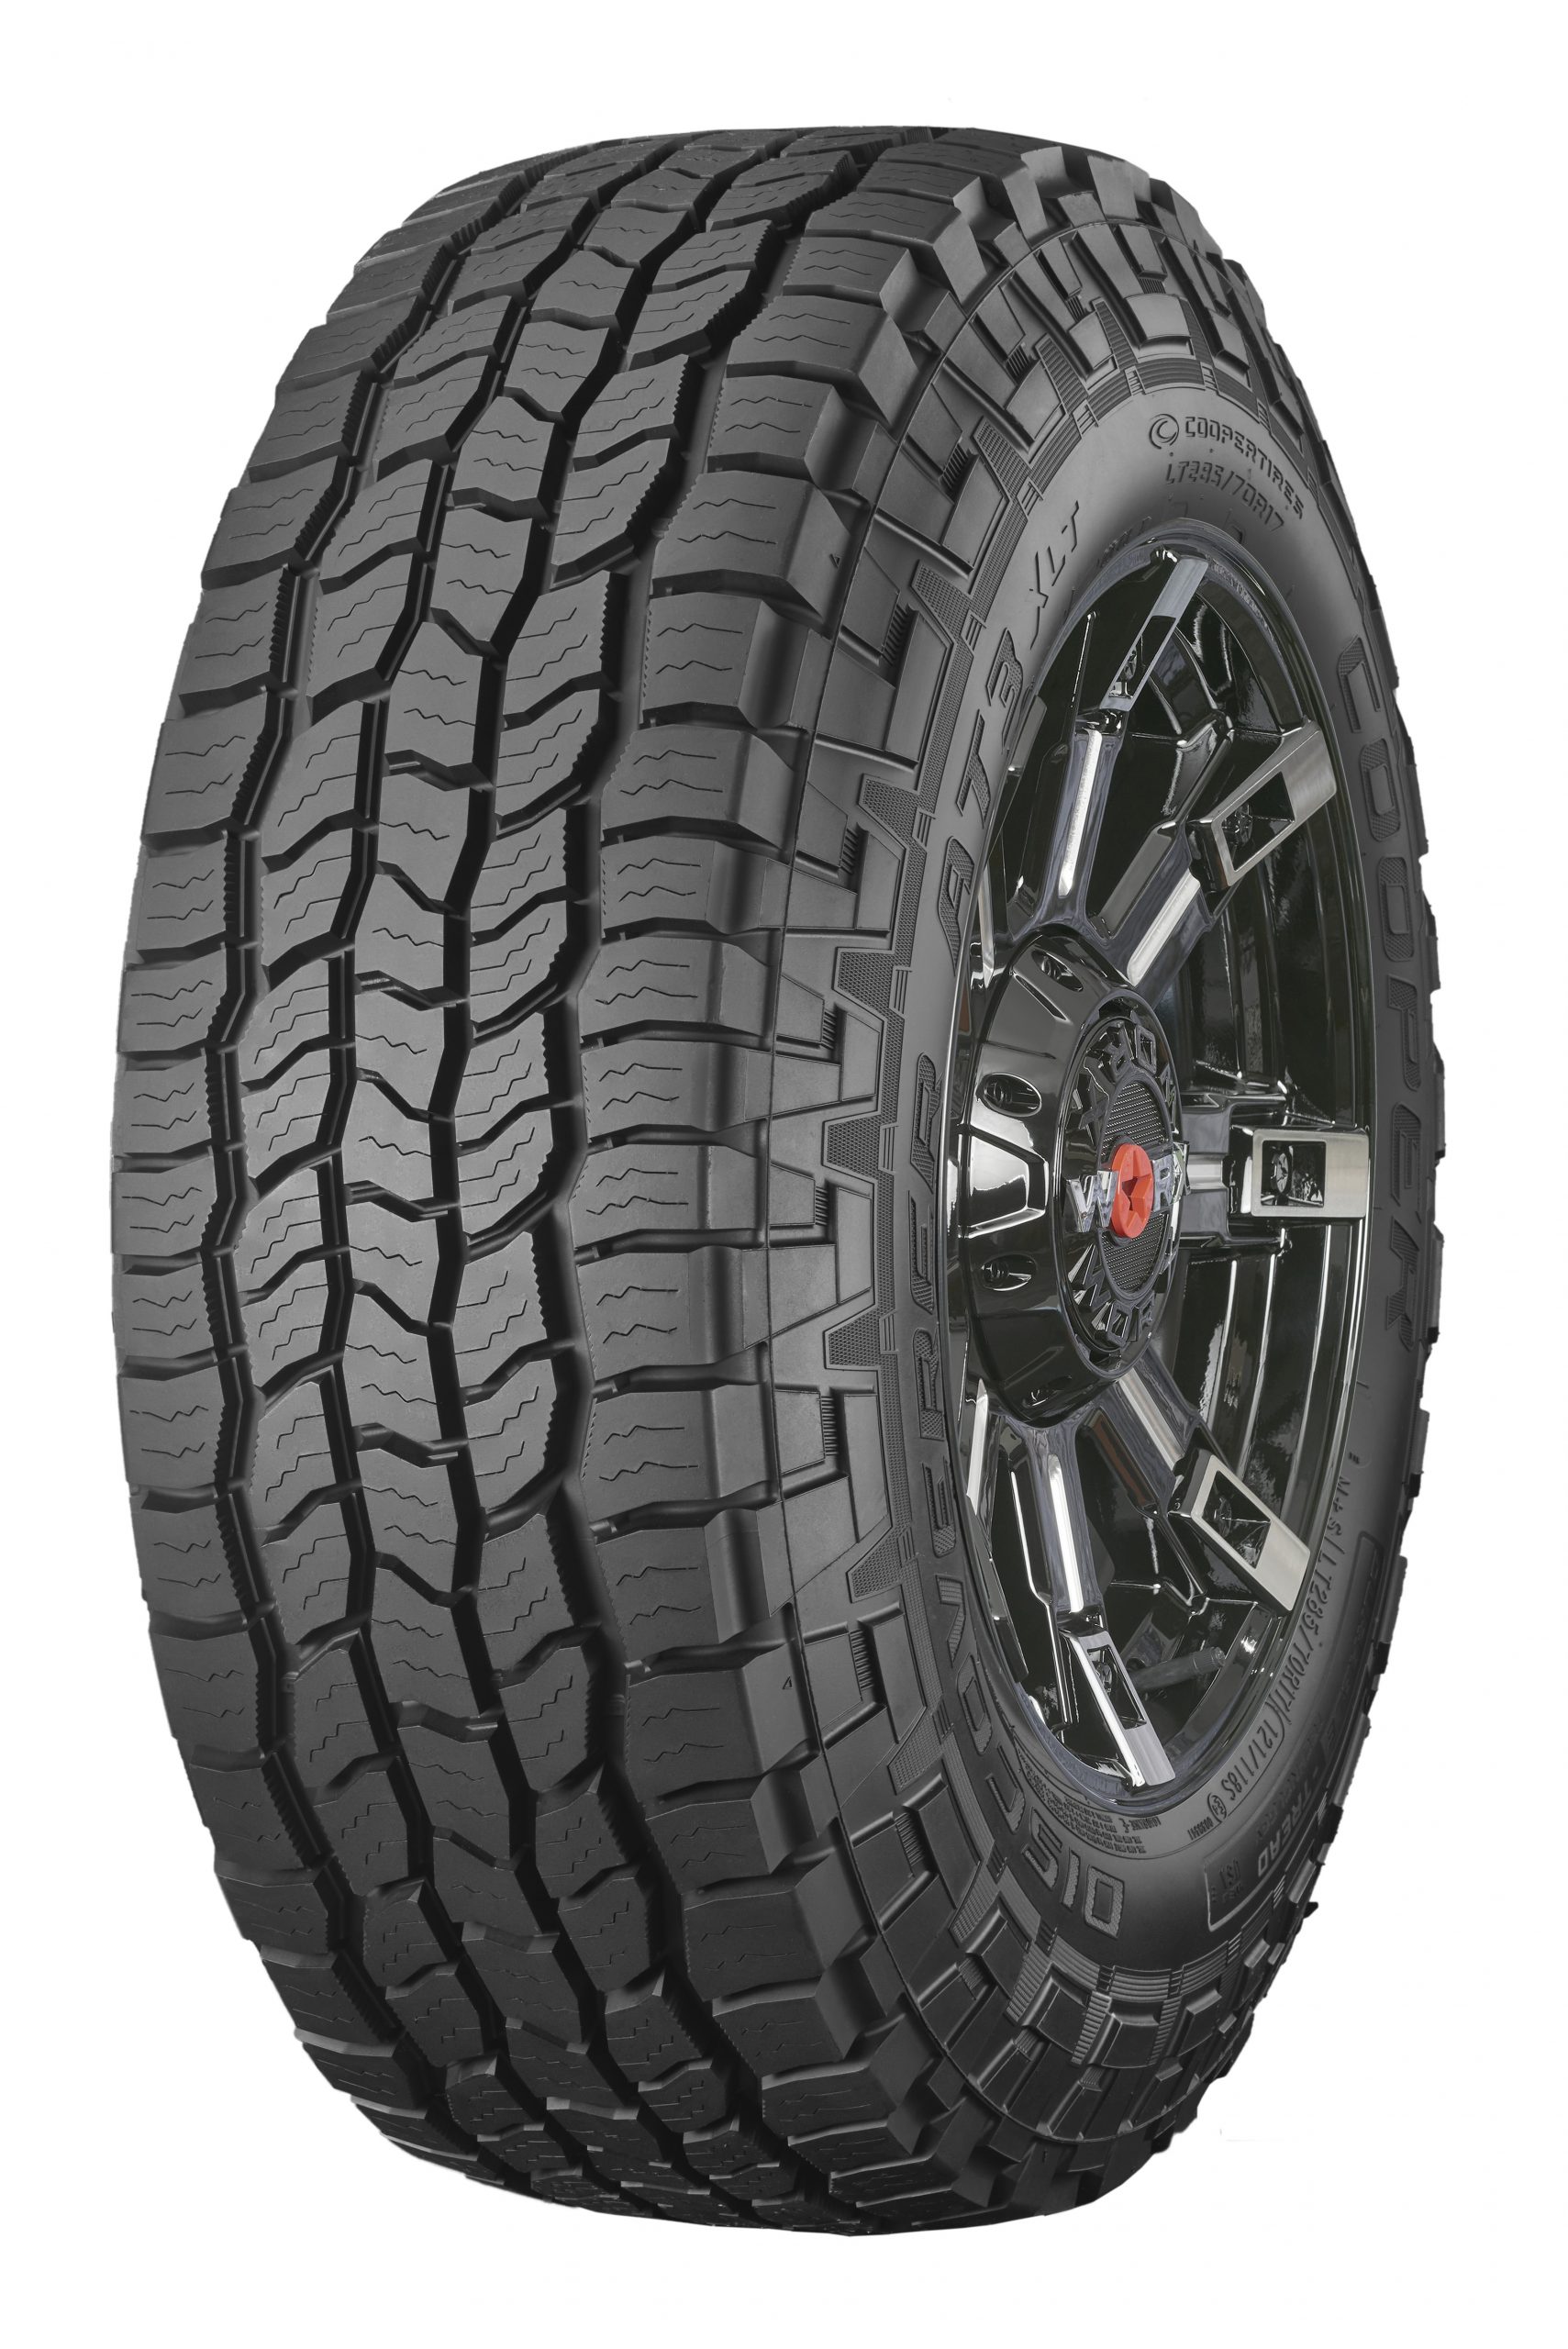 discoverer-at3-xlt-all-weather-tire